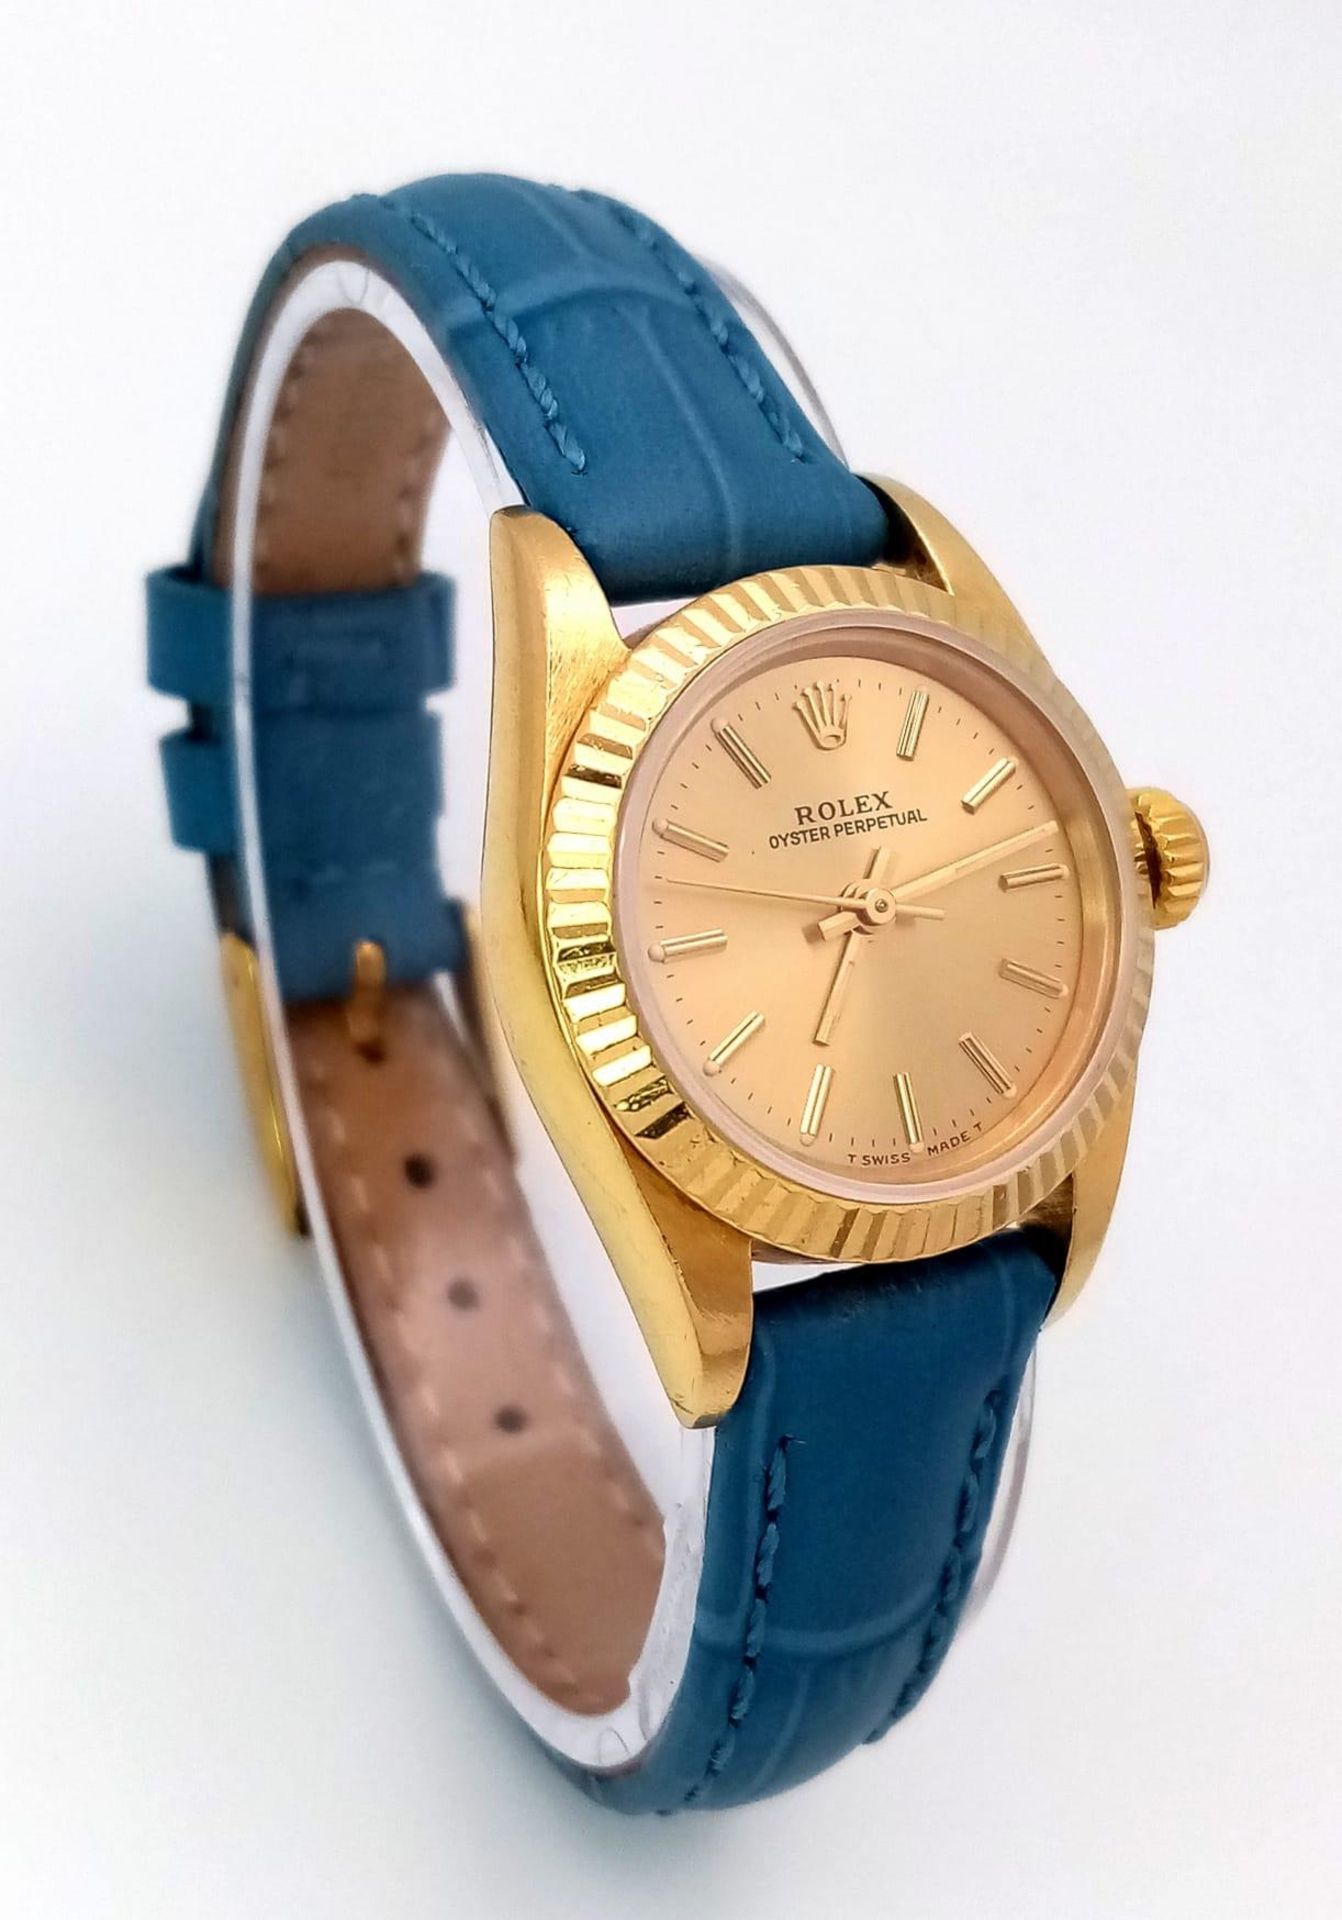 An 18k Gold Rolex Oyster Perpetual Ladies Watch. Blue leather strap. 18k gold case - 25mm. Gold tone - Image 2 of 10